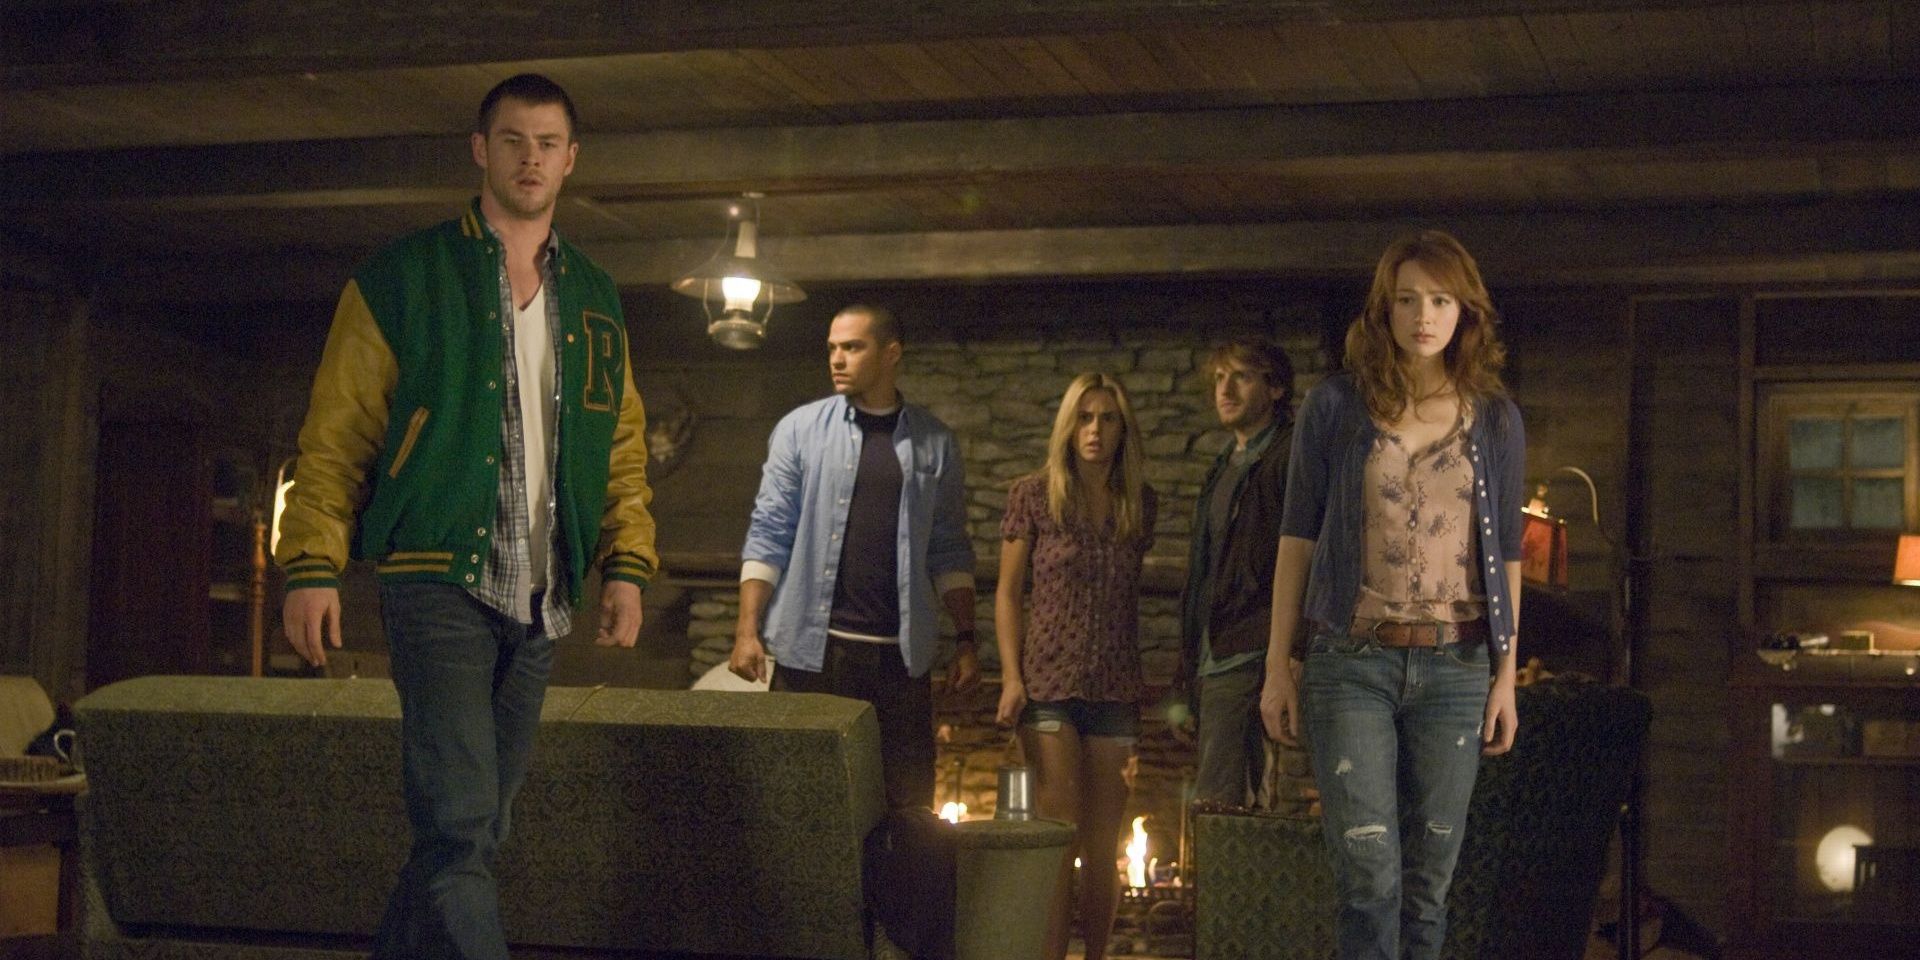 The cast of The Cabin In The Woods